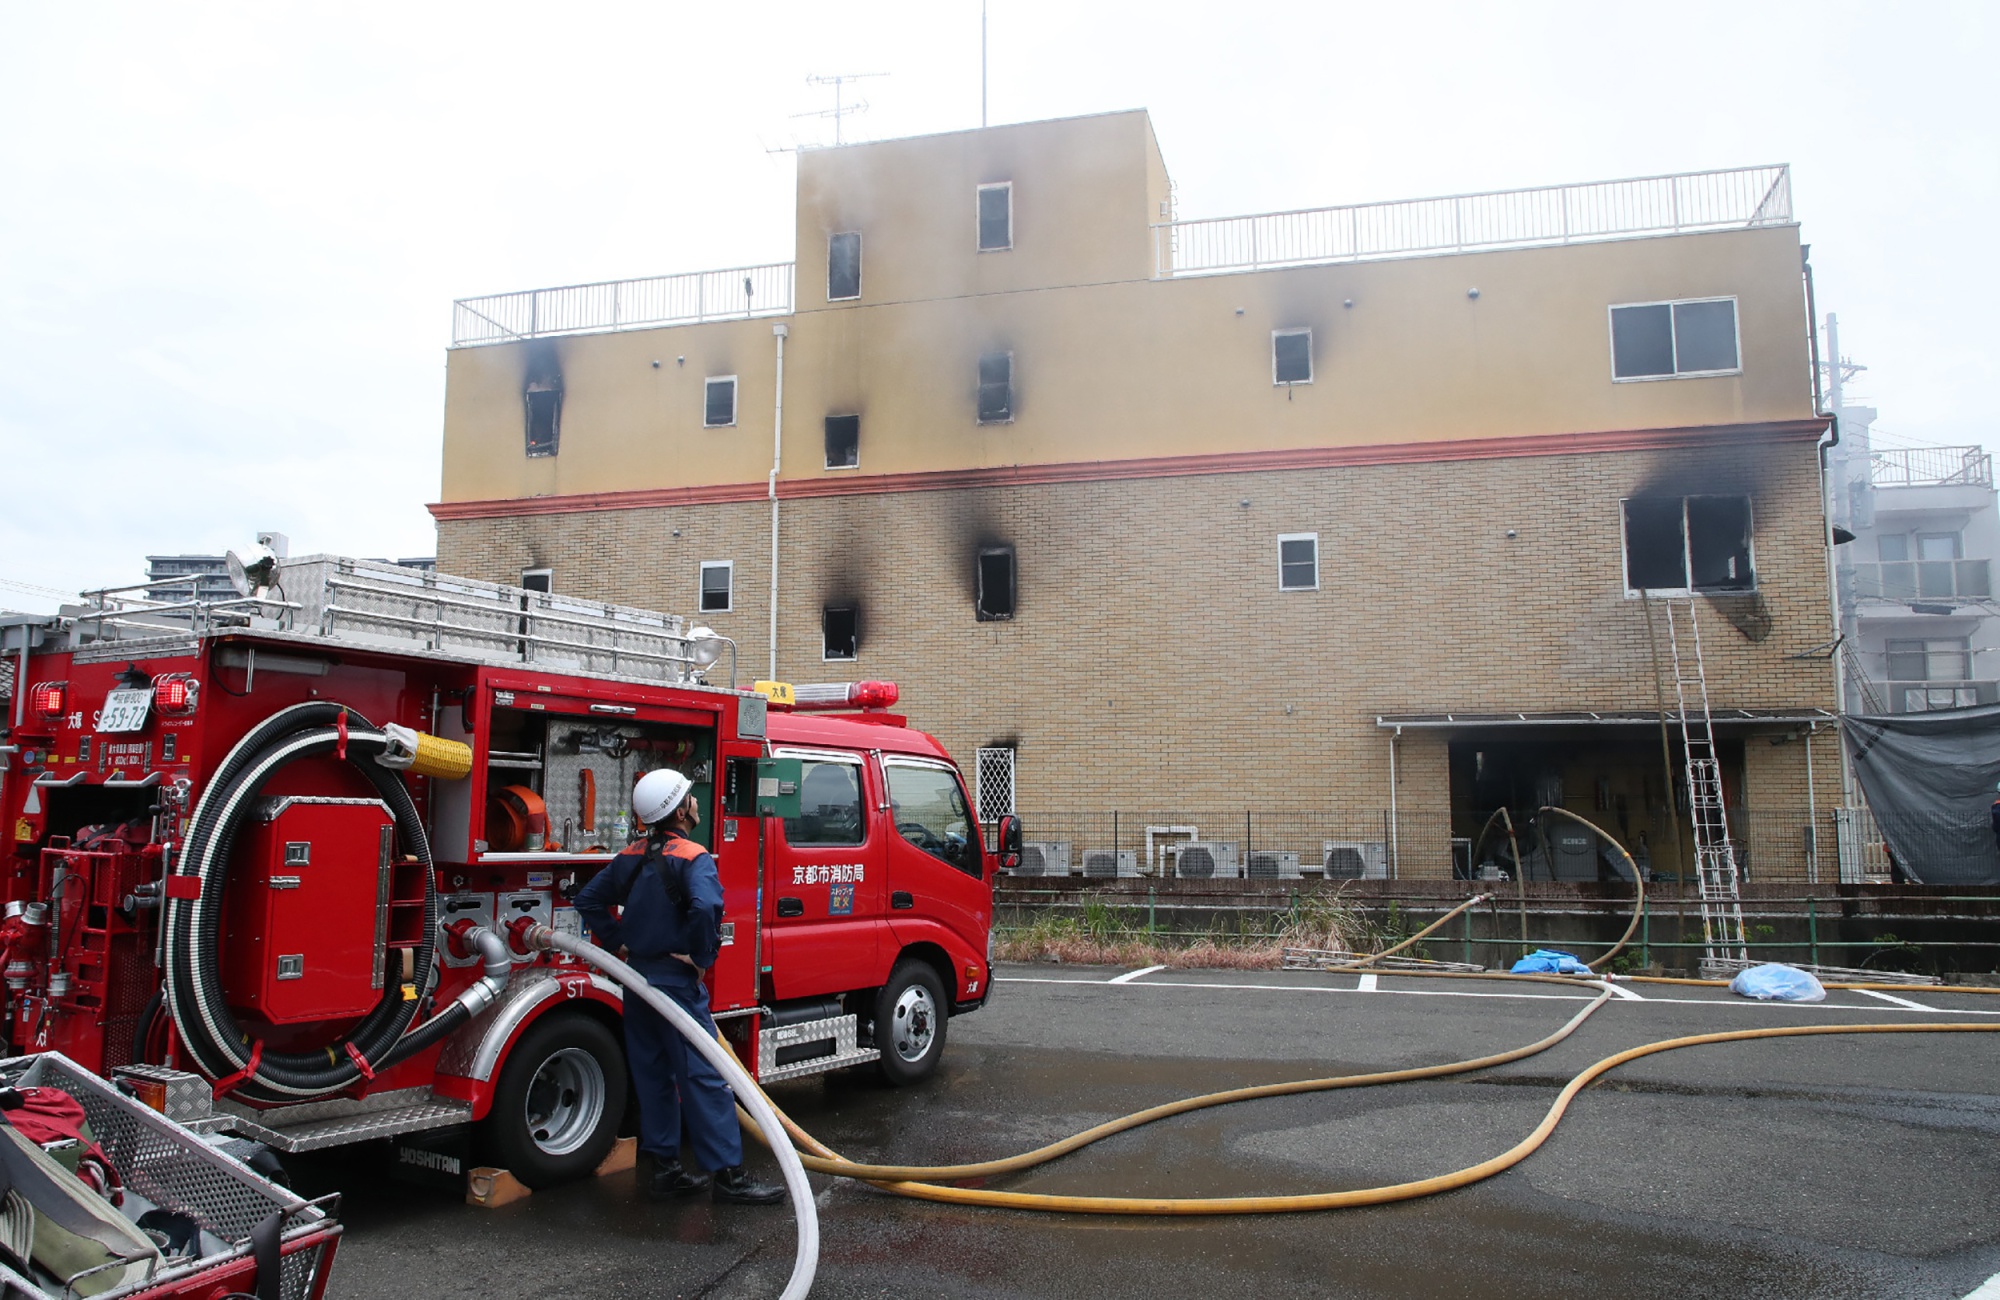 Kyoto Anime studio quickly filled with smoke, gas hindering escape: fire  dept. report - The Mainichi